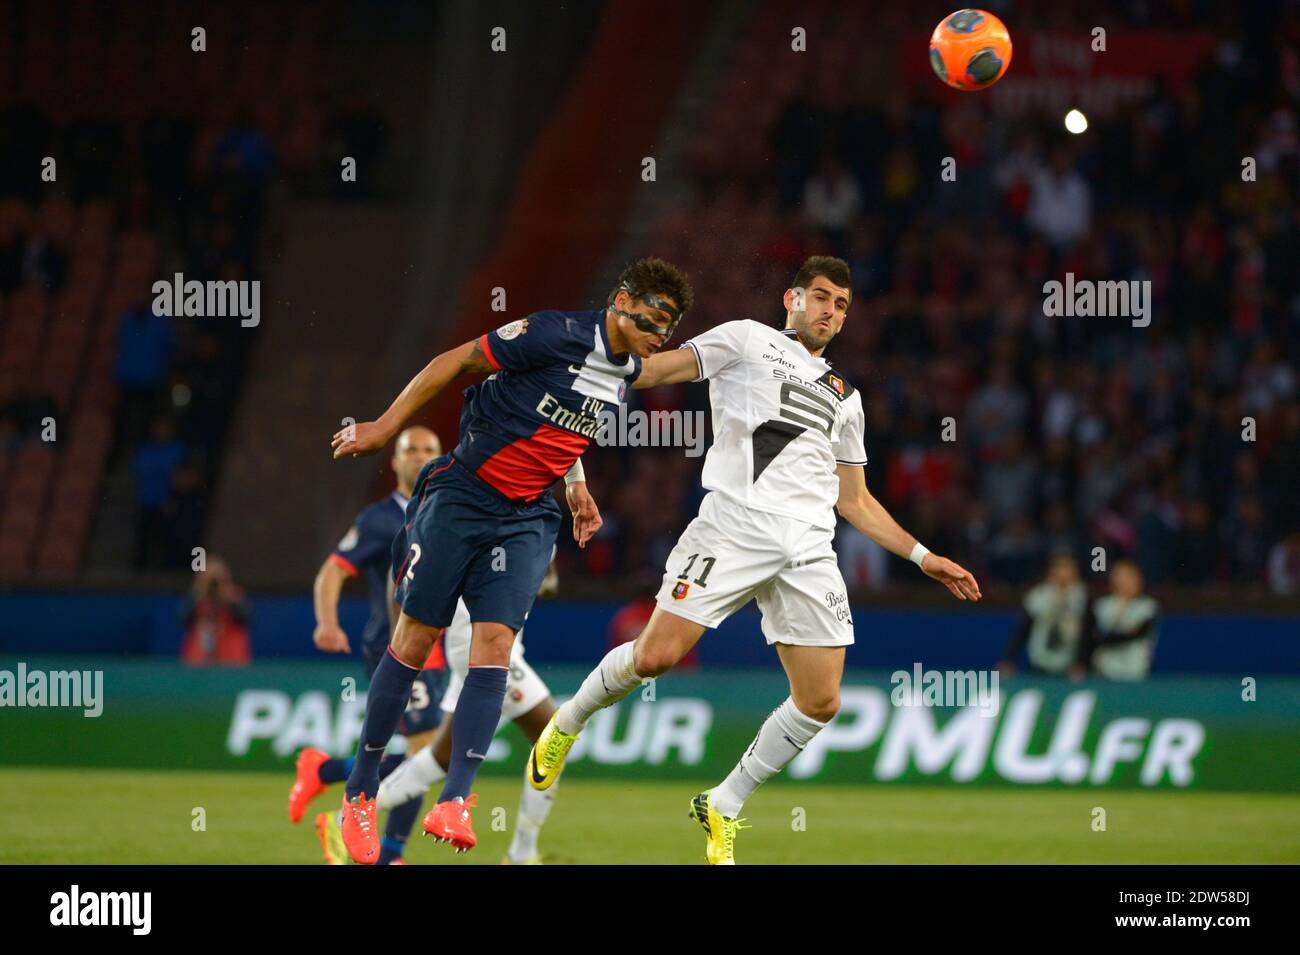 PSG's Thiago Silva battling Rennes's Nelson Oliveira during the French League One soccer match, Paris-St-Germain vs Rennes in Parc des Princes, Paris, France, on May 7th, 2014.. Rennes won 2-1 bit PSG became French League One Champion. Photo by Henri Szwarc/ABACAPRESS.COM Stock Photo